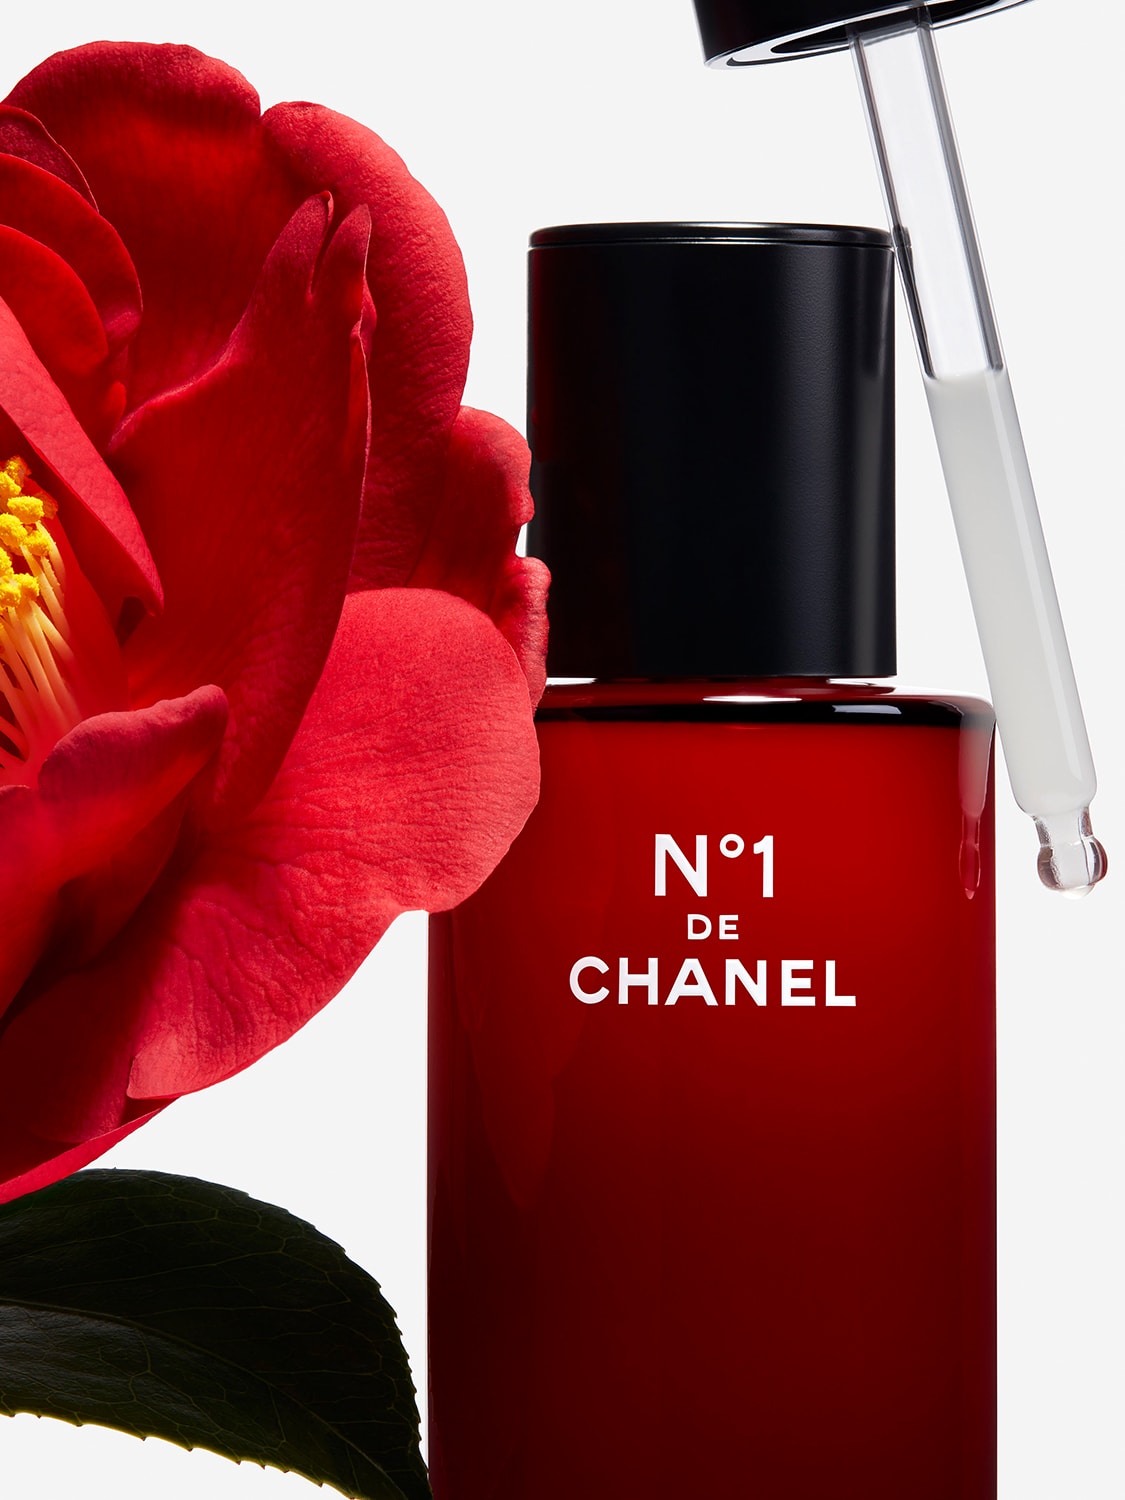 Chanel's $120 Serum Doesn't Want You to Know About These Inexpensive  Camellia Products 